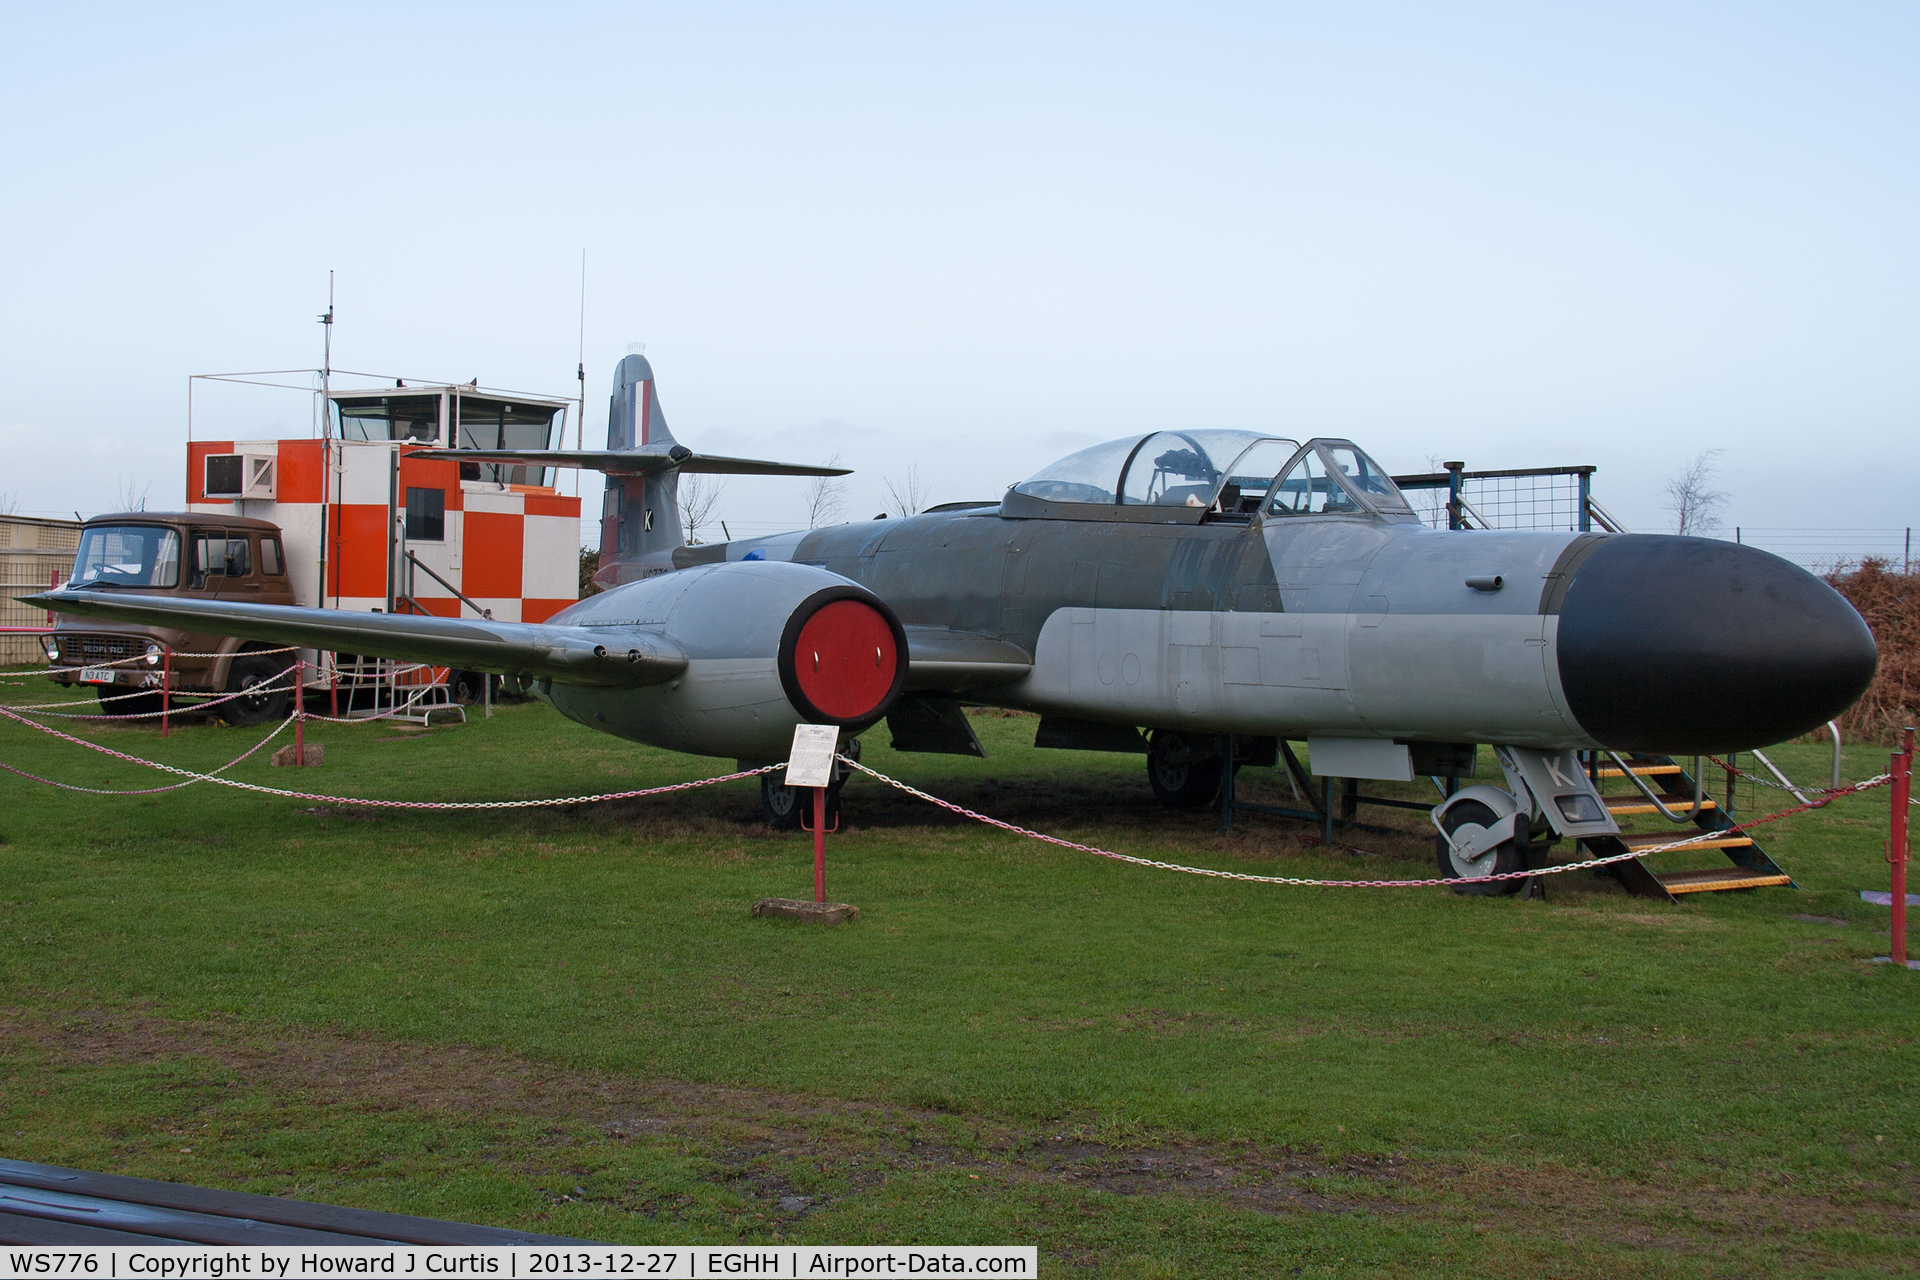 WS776, 1954 Gloster Meteor NF.14 C/N Not found WS776, Coded K. On display at the Bournemouth Aviation Museum.